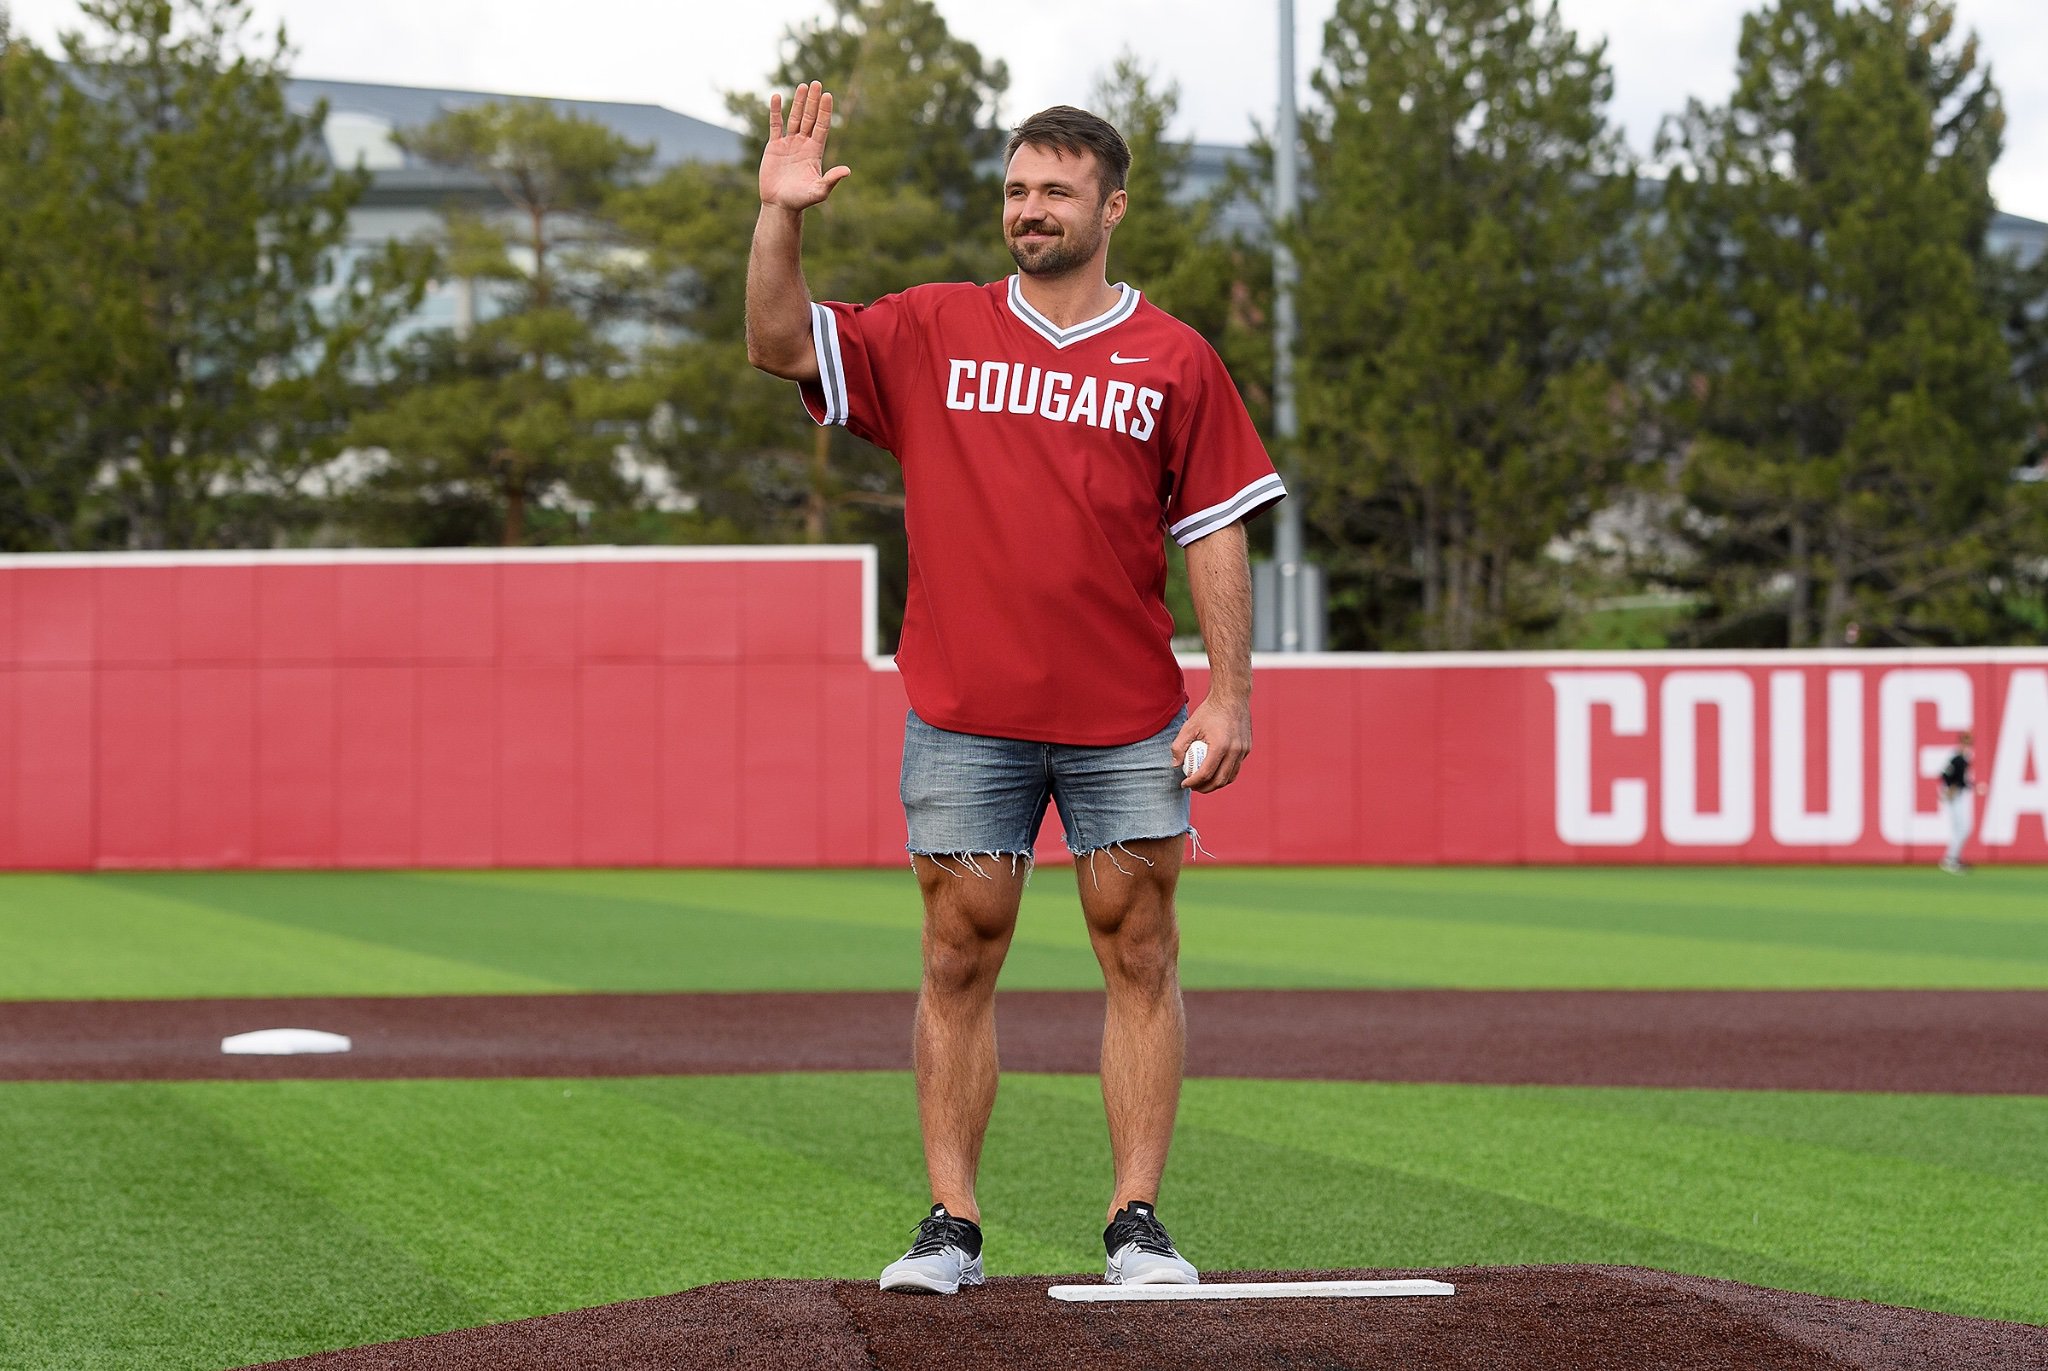 Gardner Minshew On Twitter First Pitch Comin In Hot Thanks For